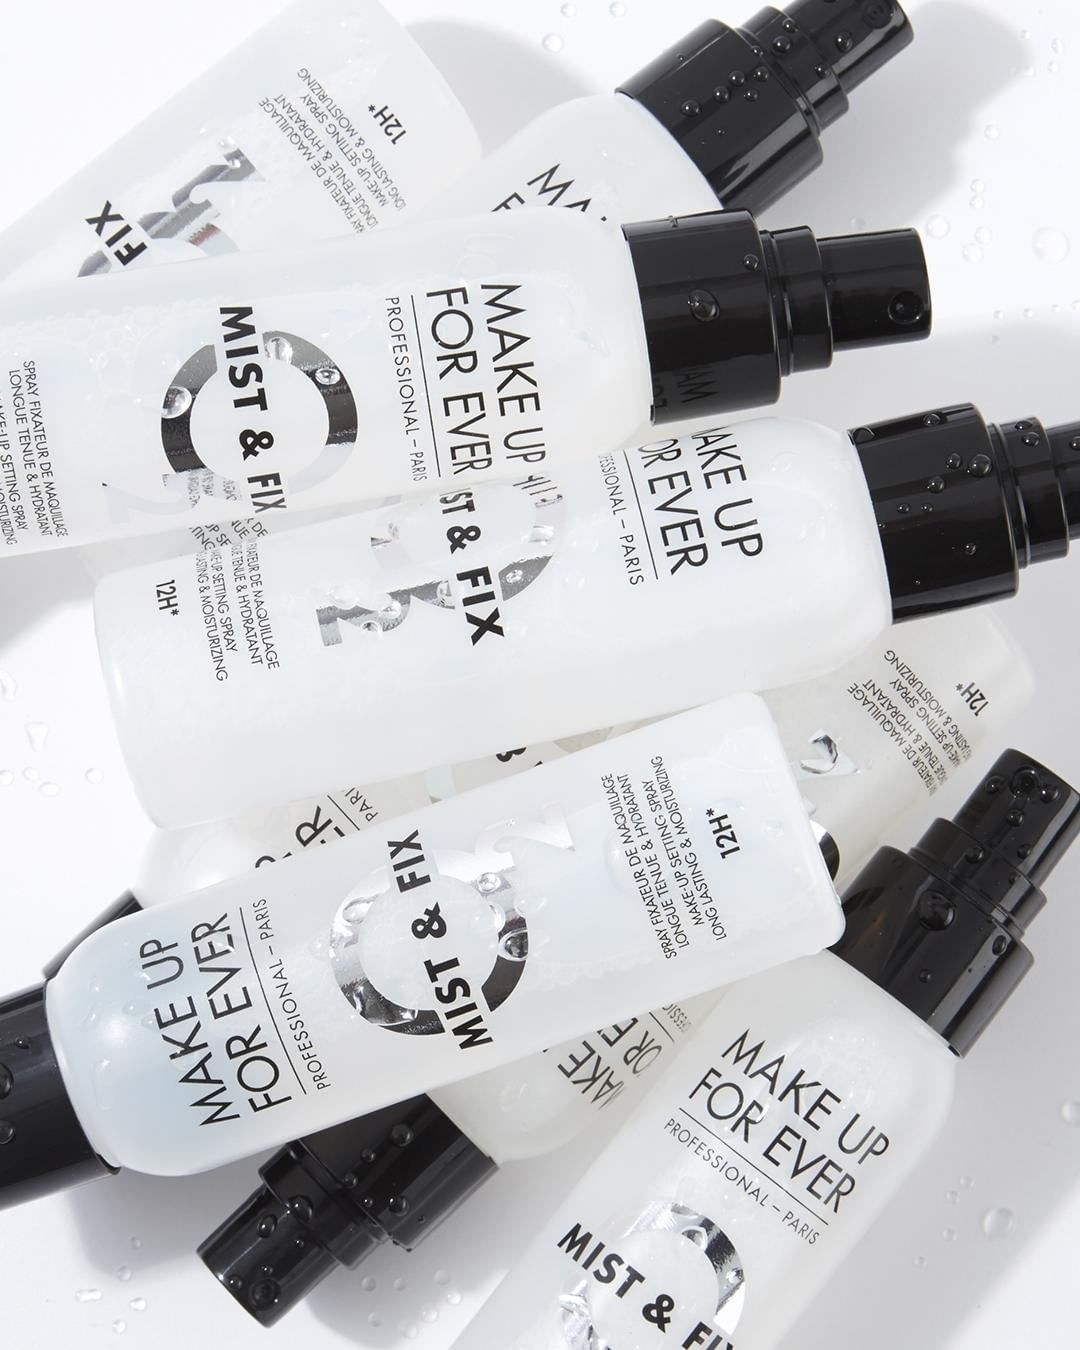 Make Up For Ever Mist And Fix O2 Makeup Setting Spray: For all day fresh  makeup!